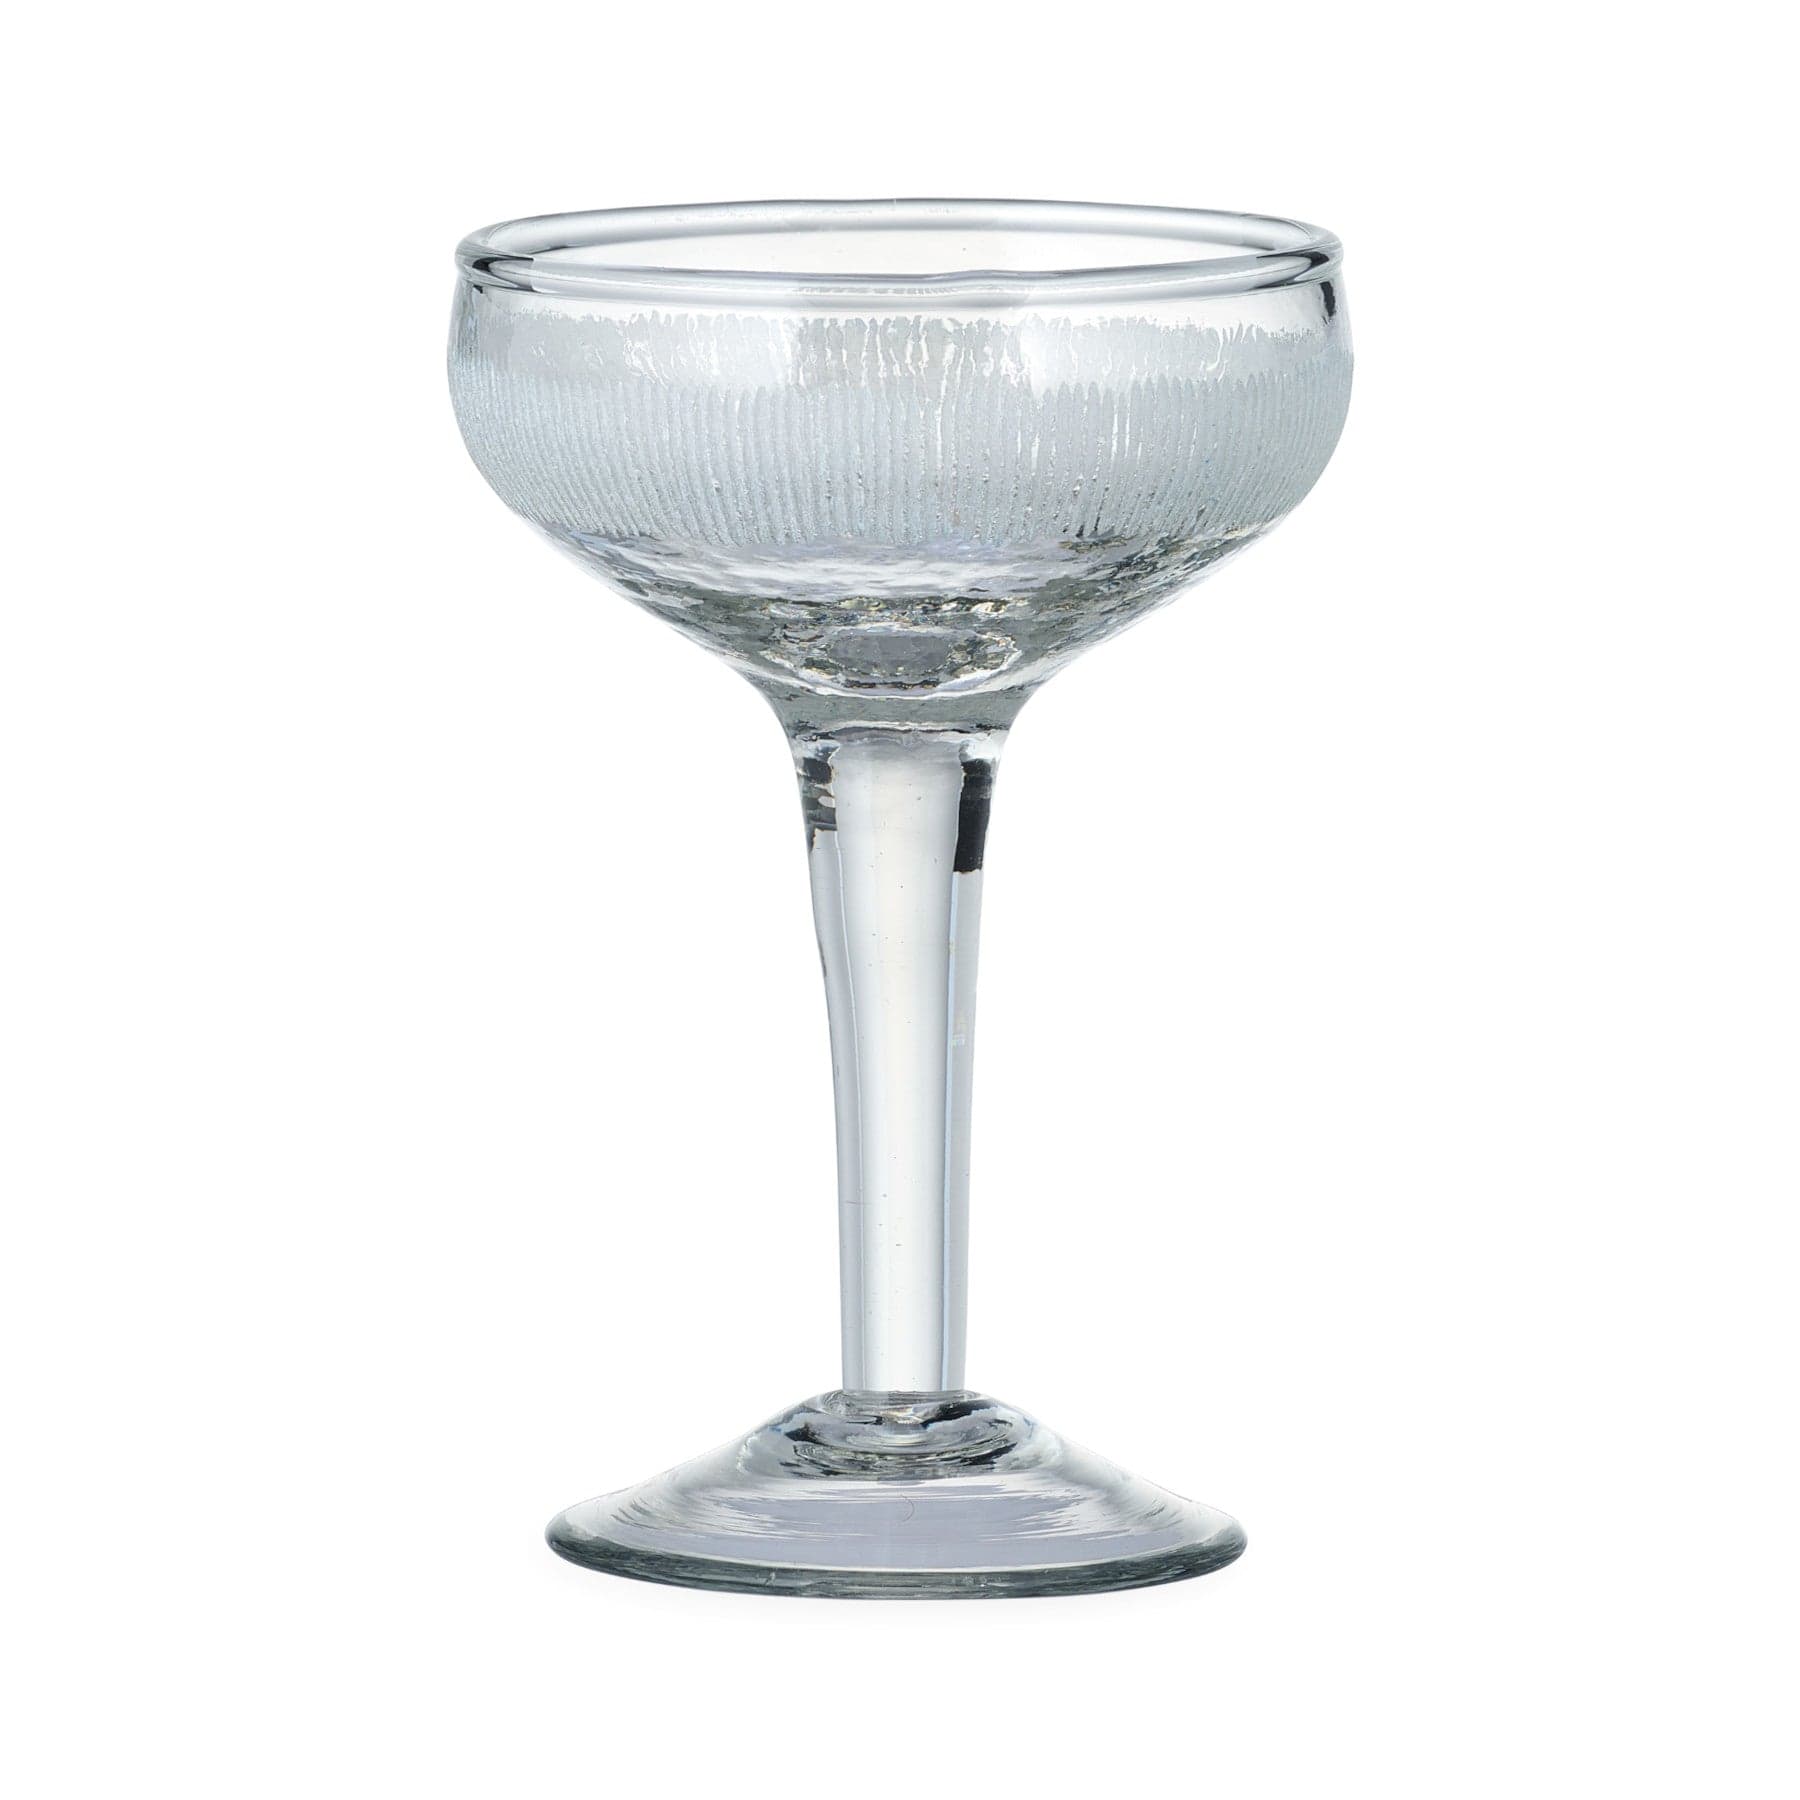 Empty crystal margarita glass on white background, transparent elegant stemware for cocktails, isolated clear glassware